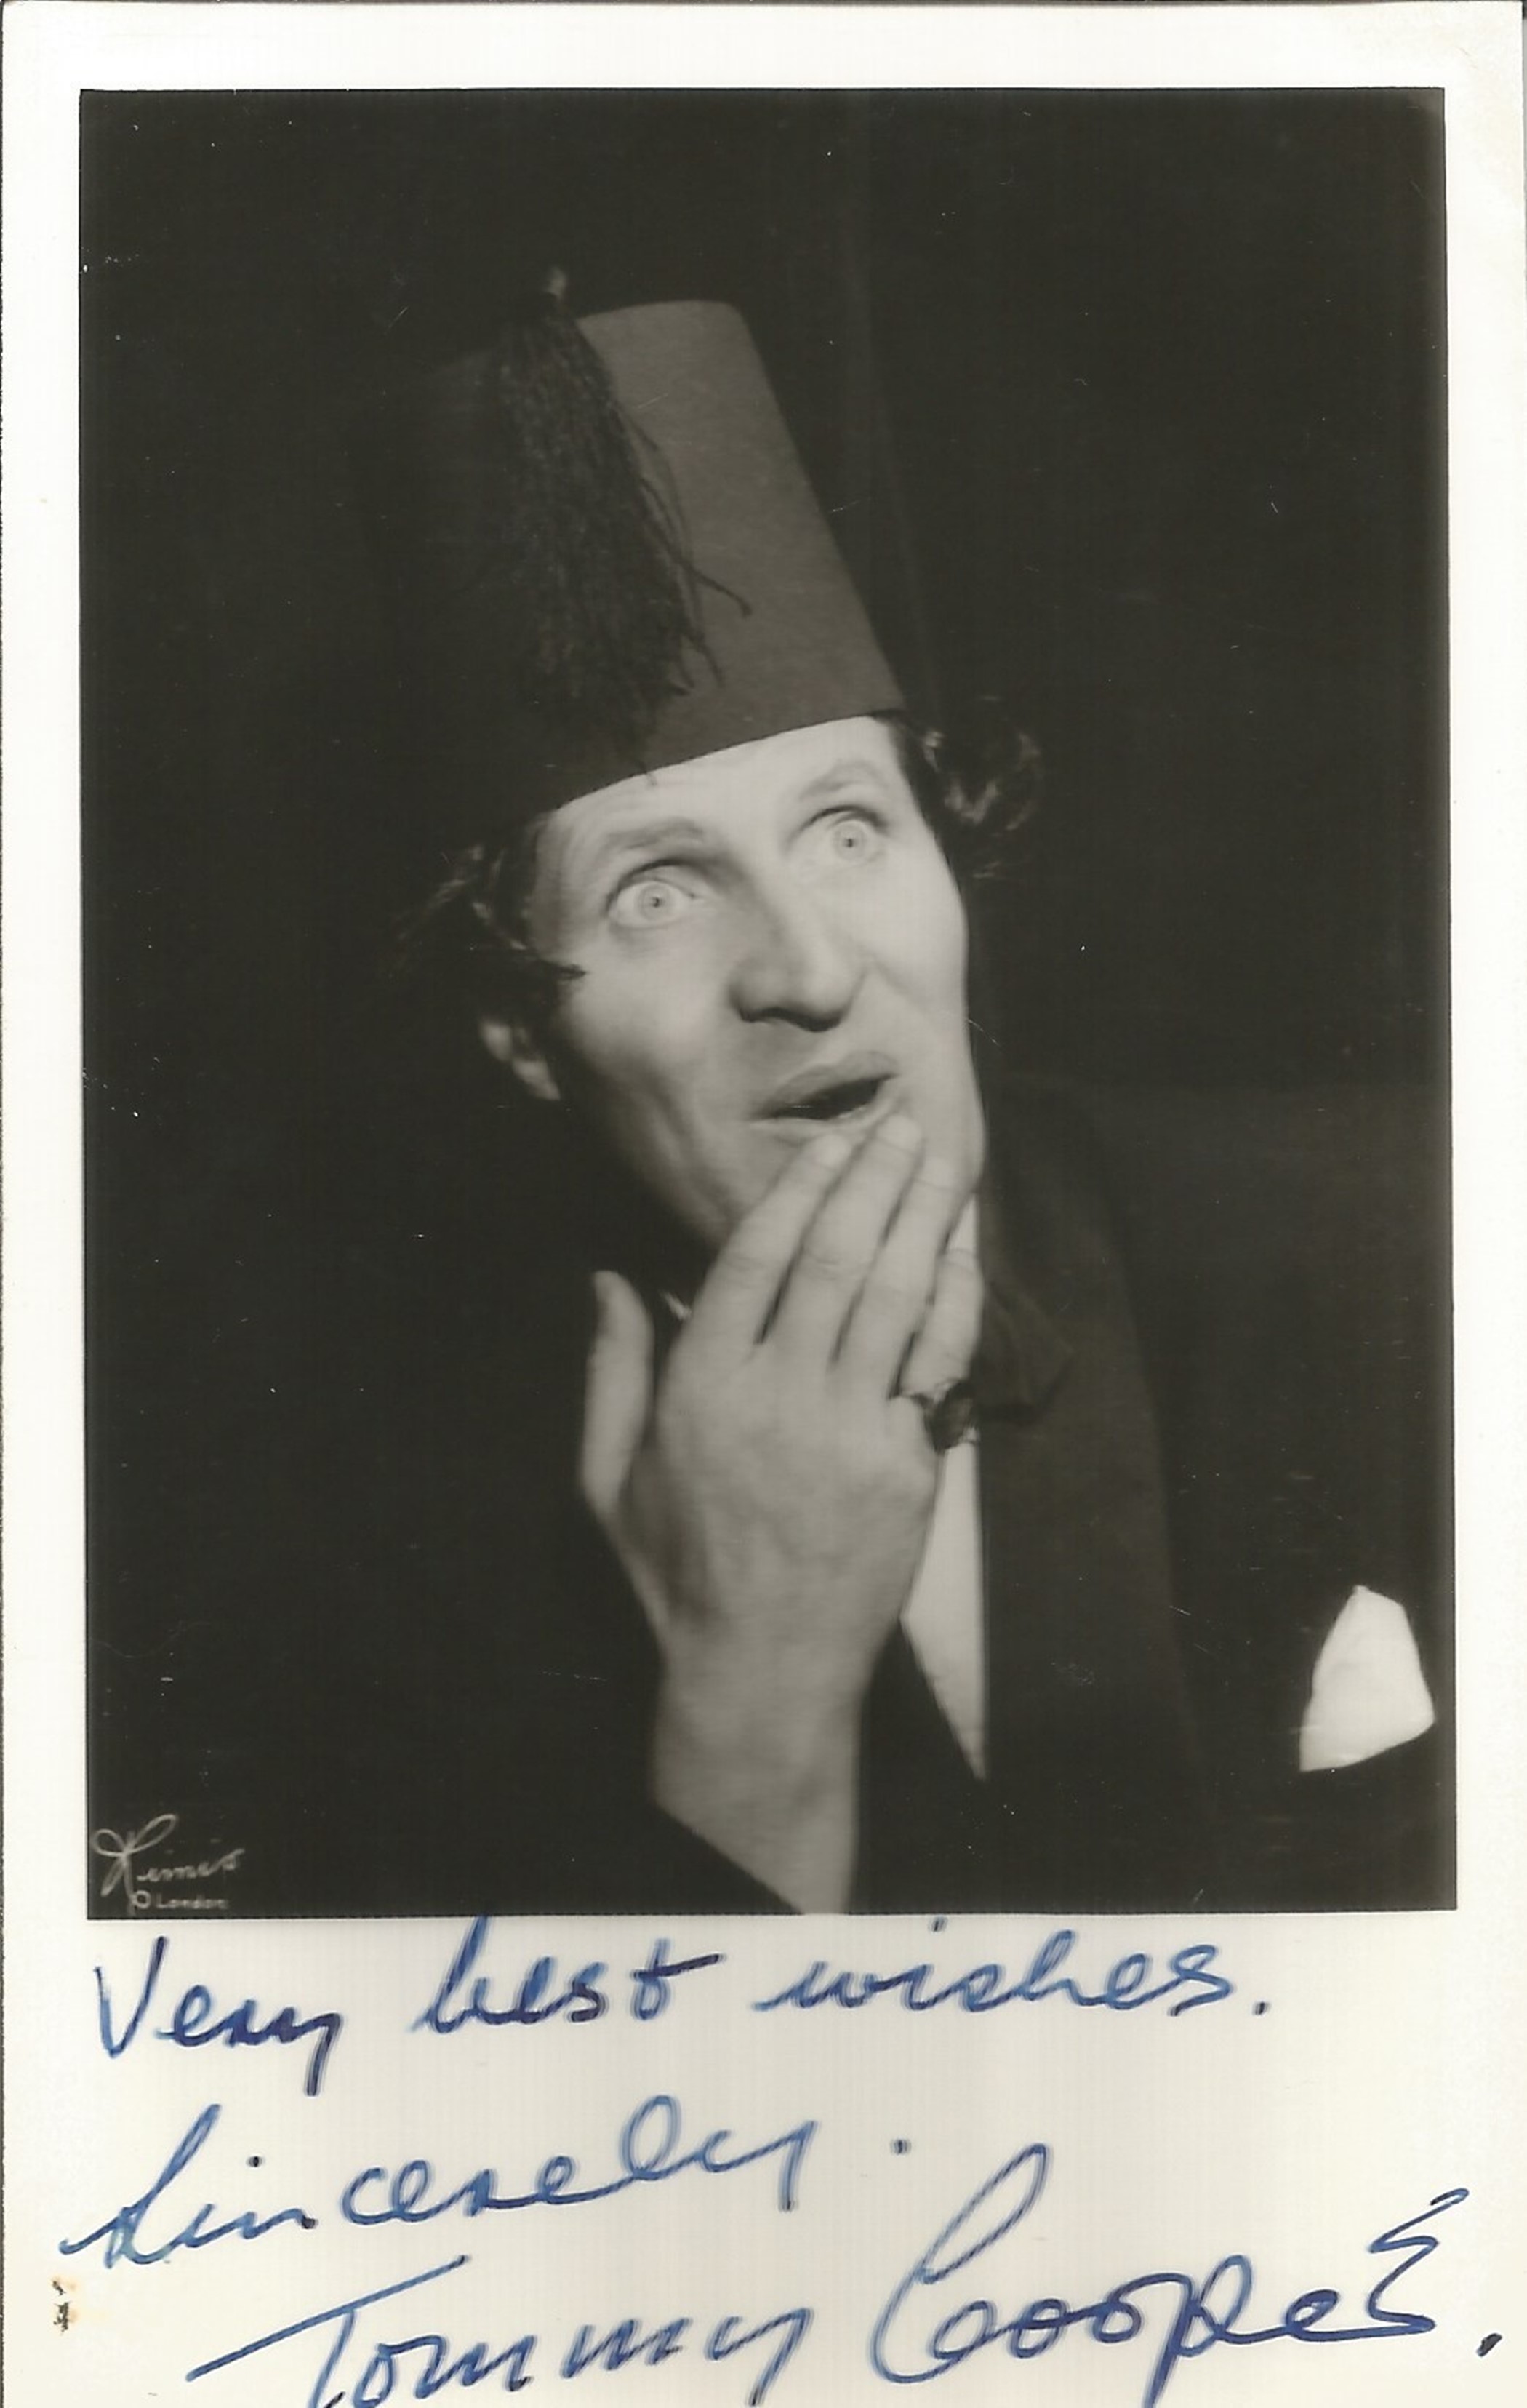 Tommy Cooper signed 6x4 black and white photo. Thomas Frederick Cooper, 19 March 1921 - 15 April